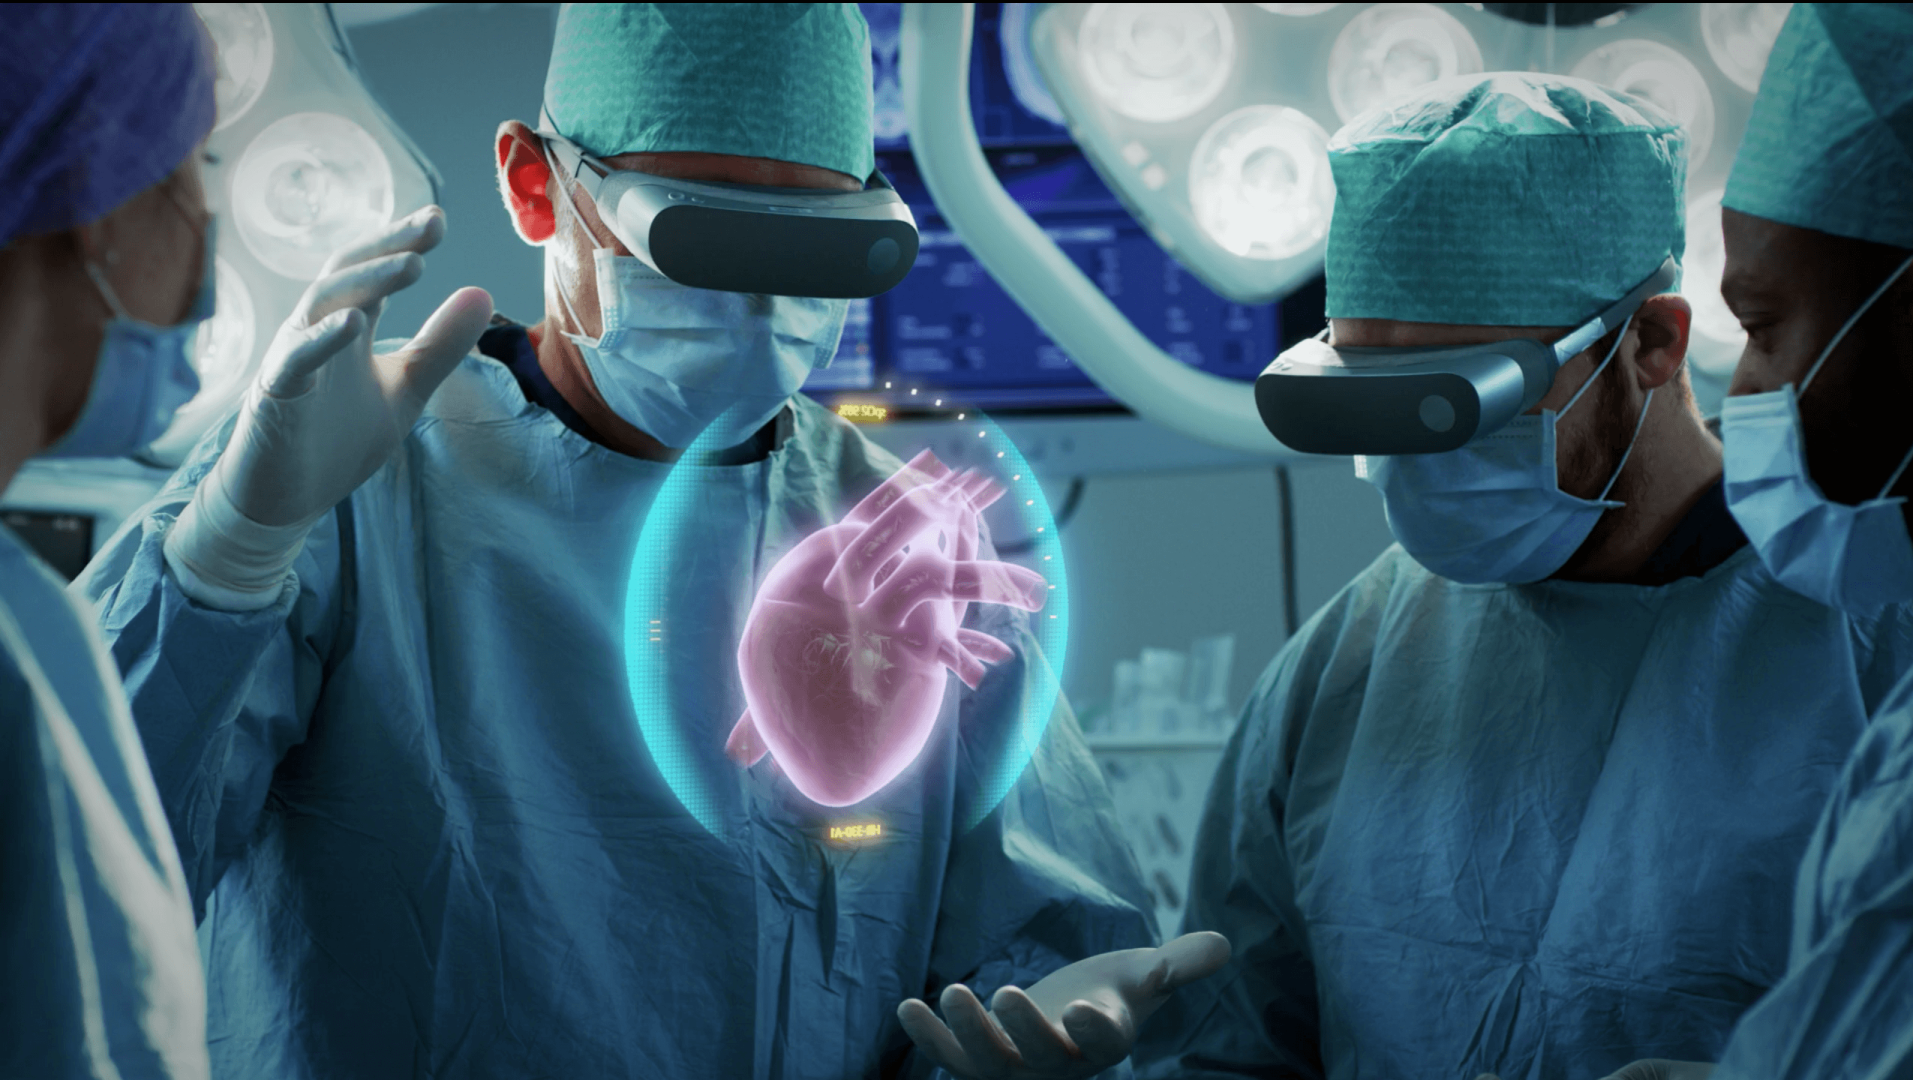 Use Cases of AR and VR in Healthcare